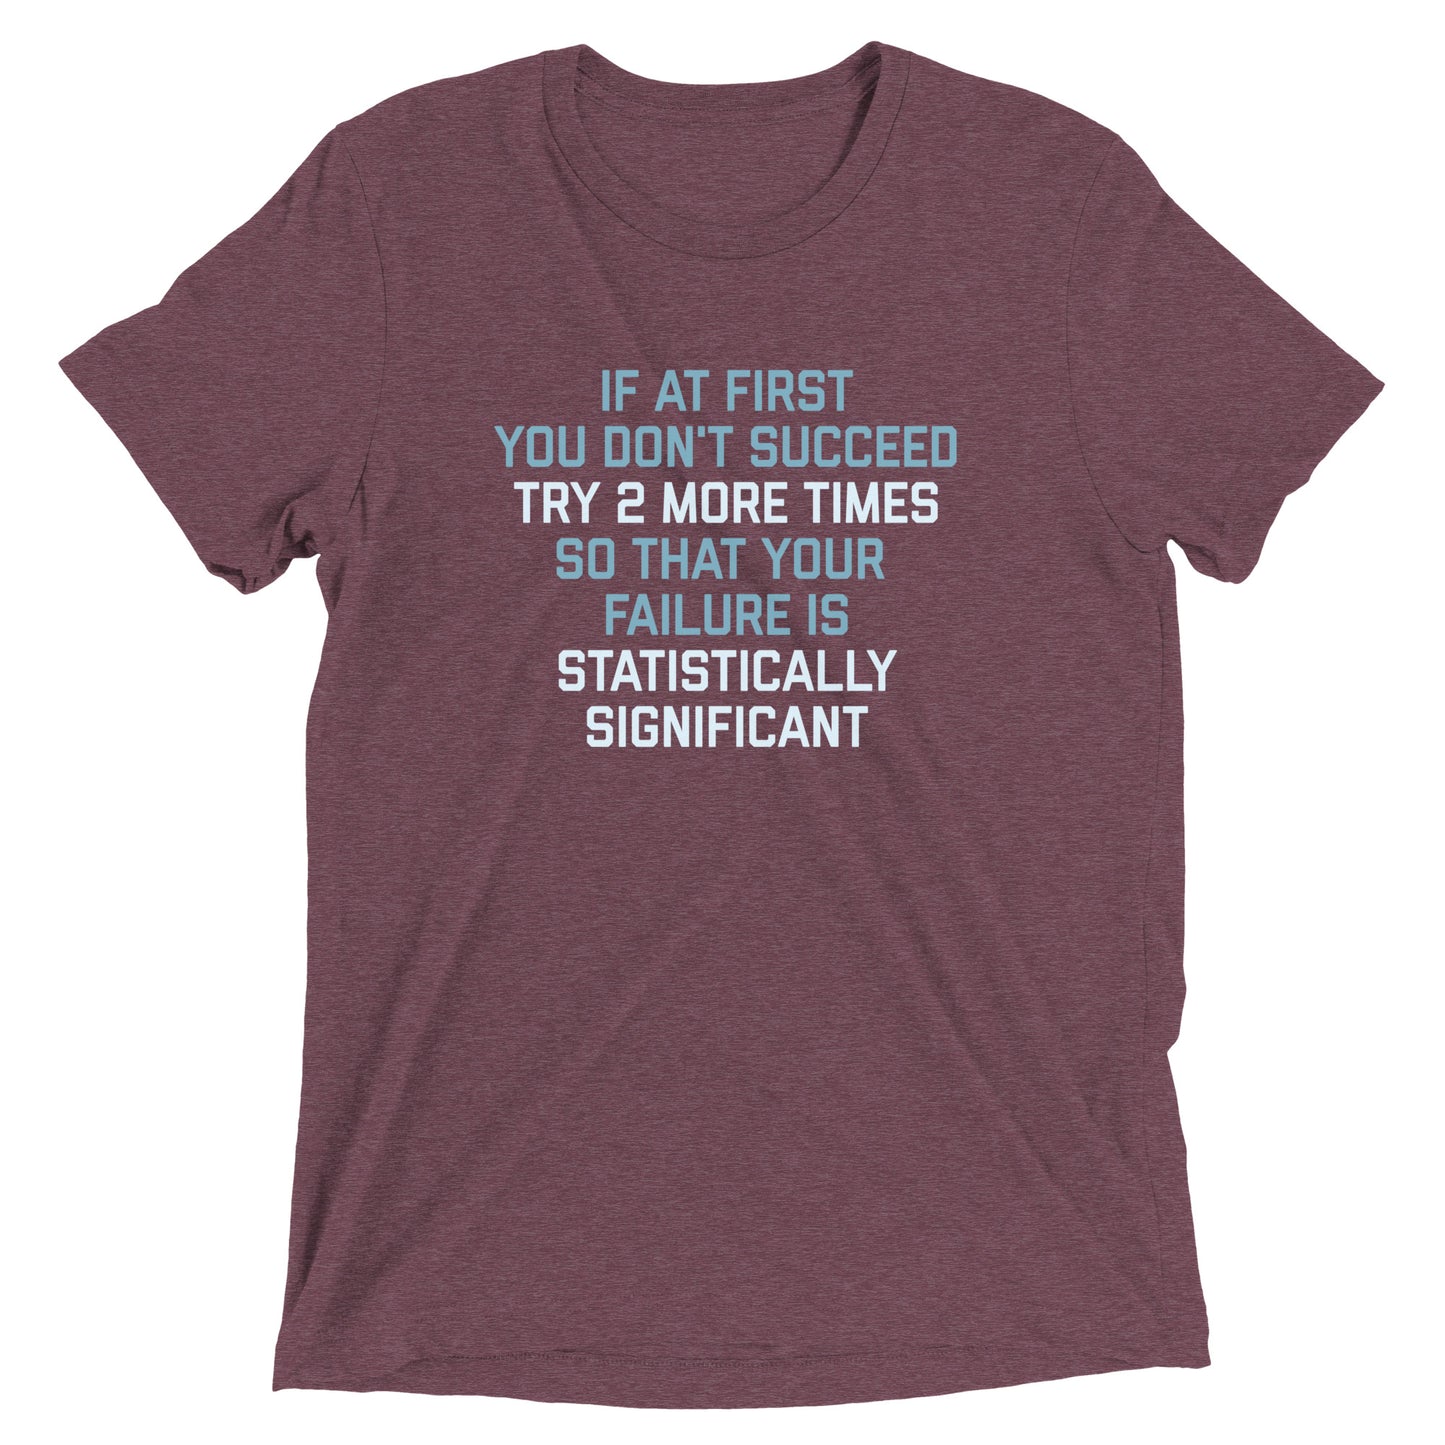 Try 2 More Times So That Your Failure Is Statistically Significant Men's Tri-Blend Tee